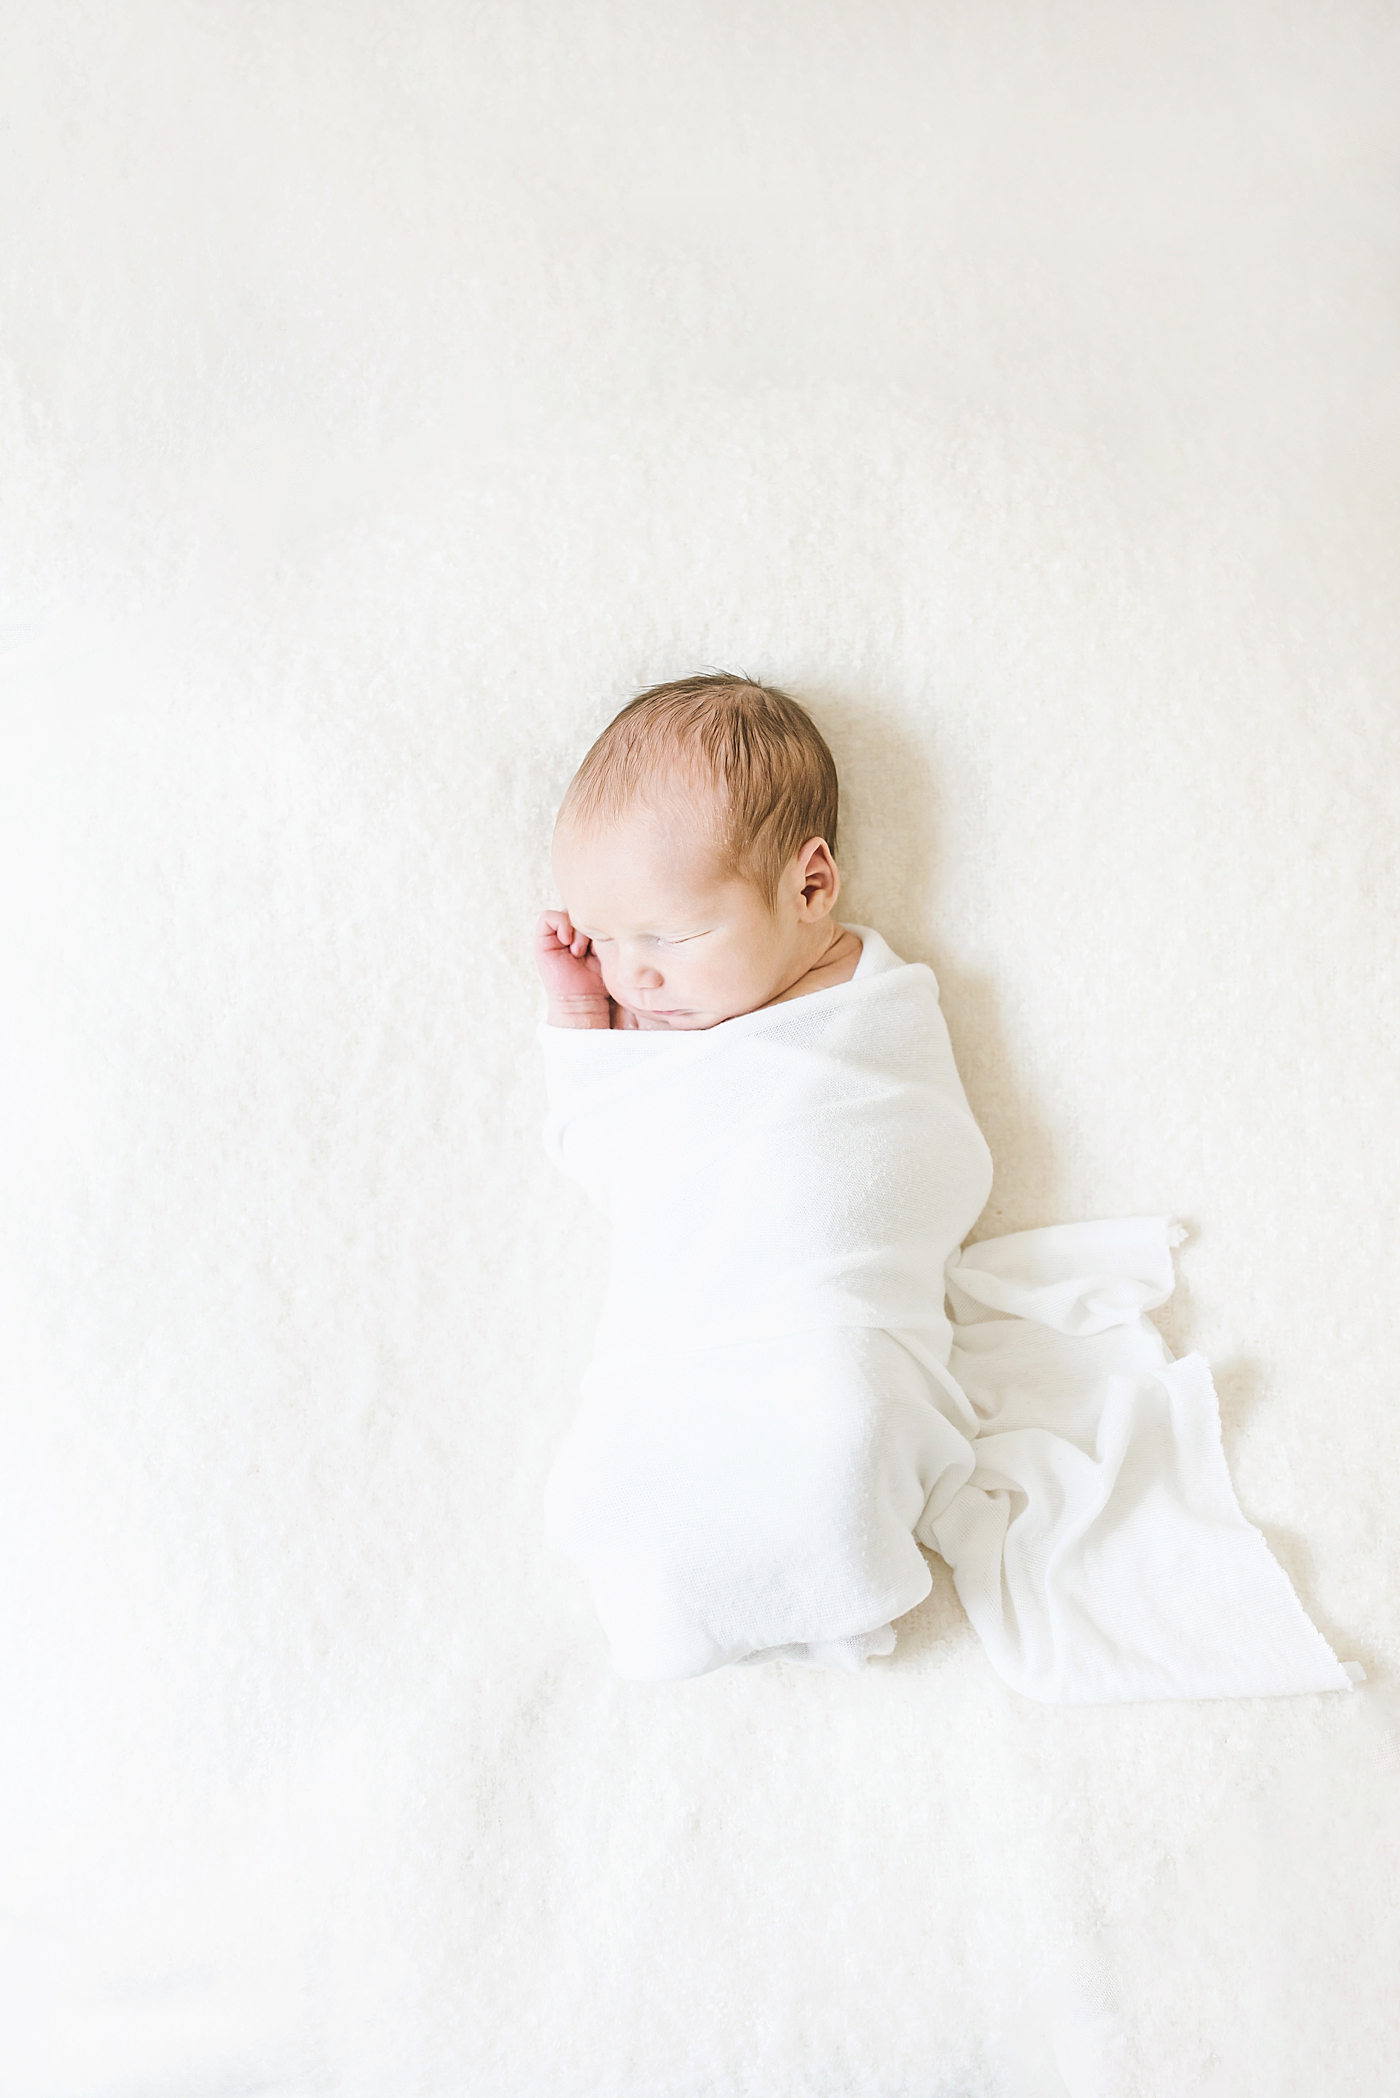 Newborn baby boy sleeping wrapped in white swaddle | Photo by Anna Wisjo Photography